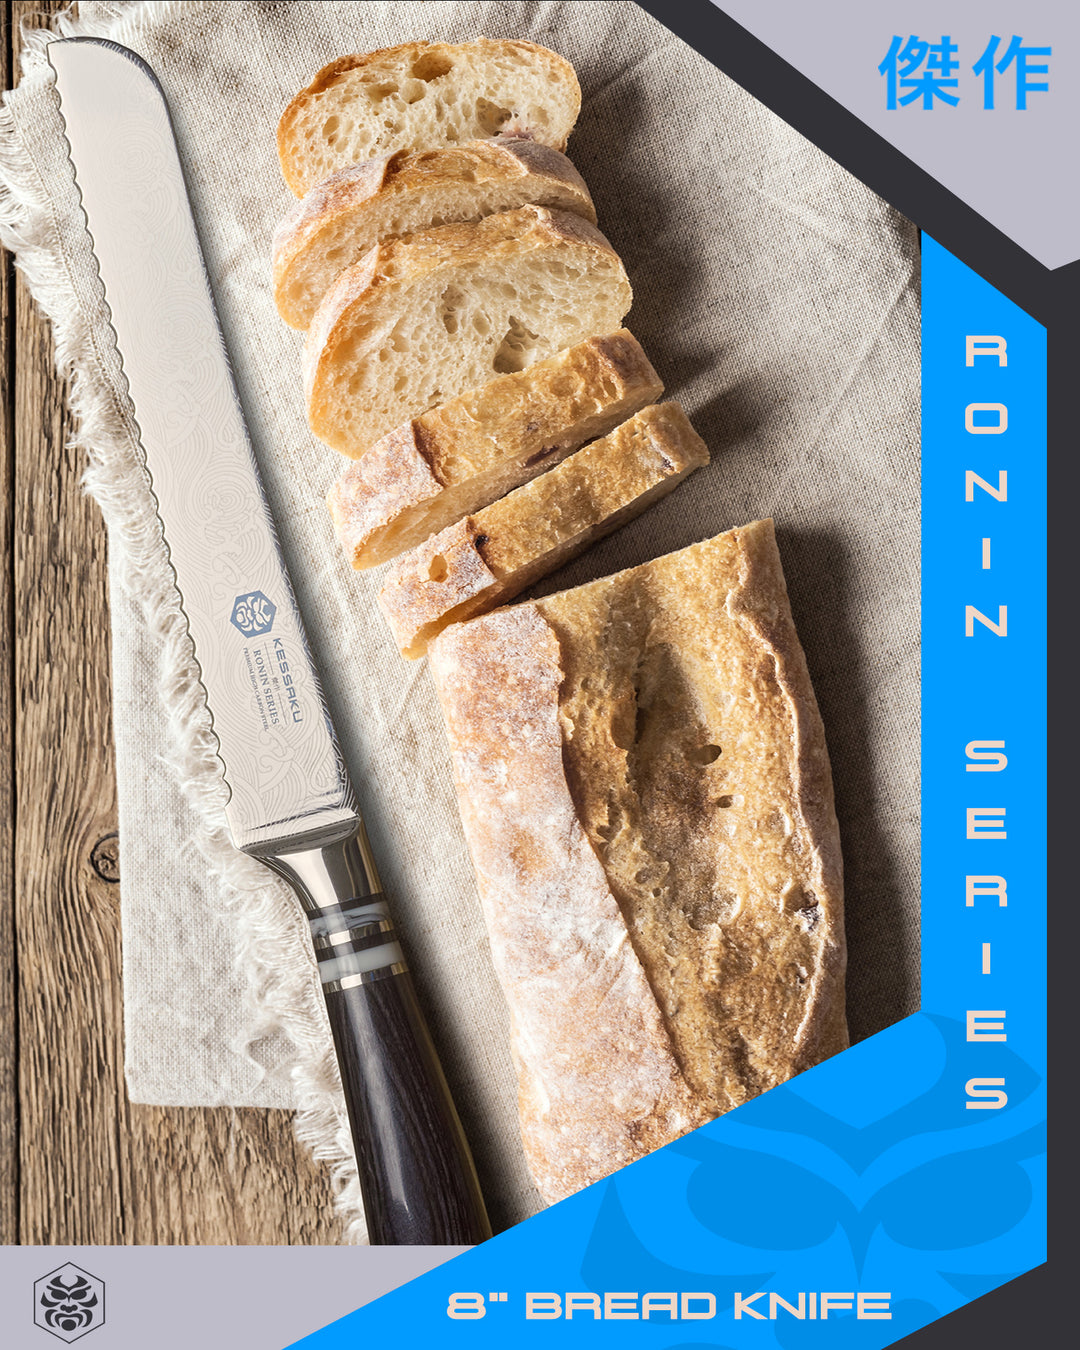 The Ronin Bread Knife and a sliced loaf of bread